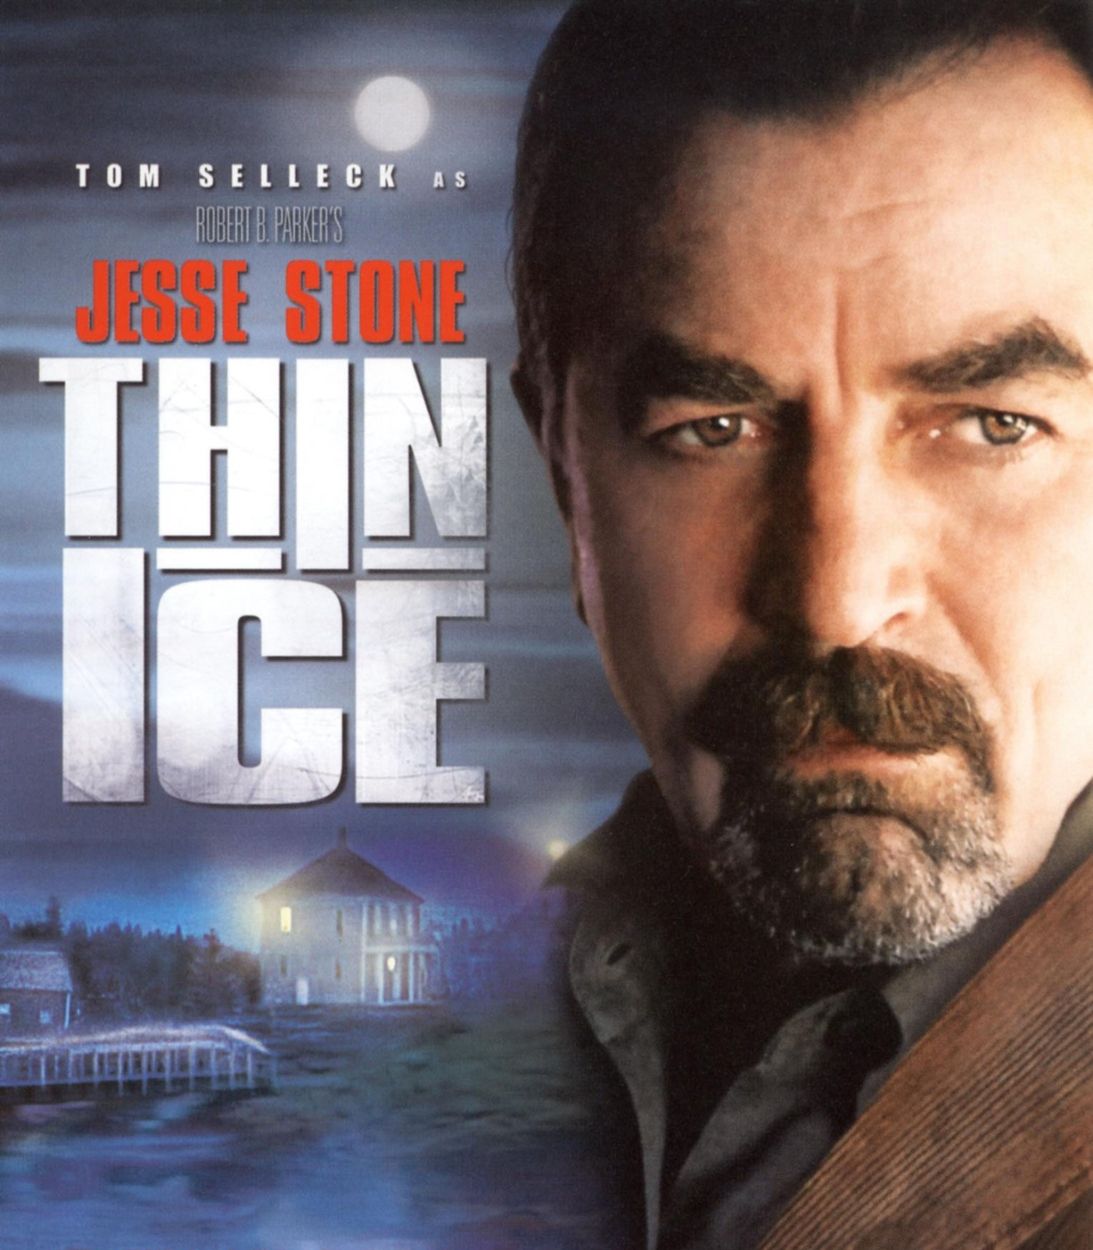 jesse stone thin ice poster TLDR vertical